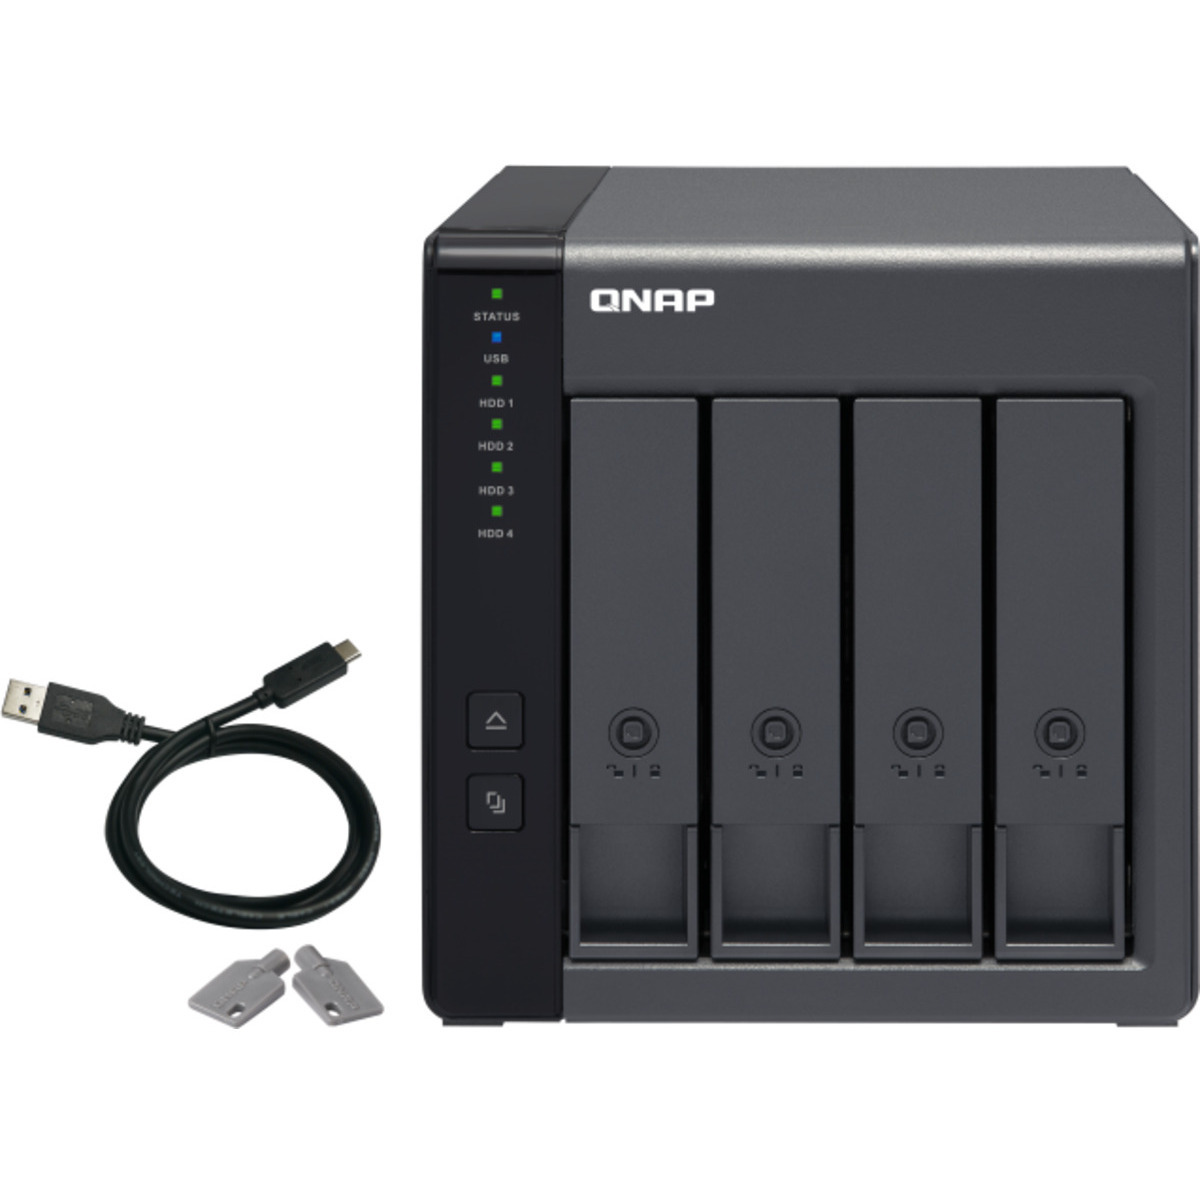 buy $3788 QNAP TR-004 External Expansion Drive 32tb Desktop Expansion Enclosure 4x8000gb Samsung 870 QVO MZ-77Q8T0 2.5 SATA 6Gb/s SSD CONSUMER Class Drives Installed - Burn-In Tested - nas headquarters buy network attached storage server device das new raid-5 free shipping usa christmas new year holiday sale TR-004 External Expansion Drive